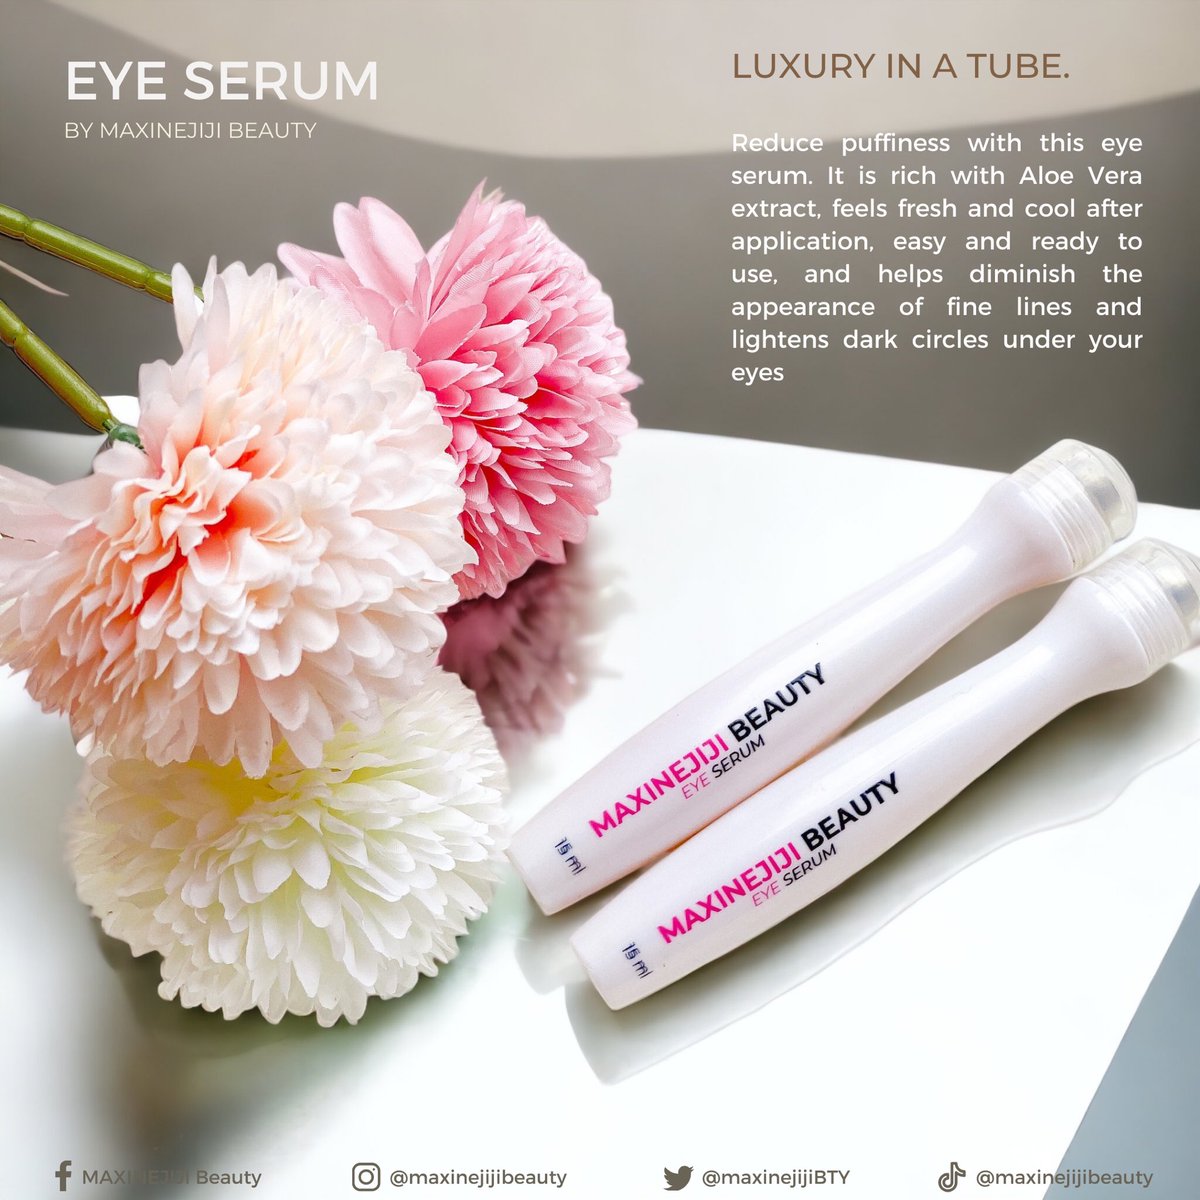 Our best-selling eye serum targets fine lines, wrinkles, puffiness and helps brighten dark circles around the eyes. 🥰 You'll get to see results around three to four weeks! 🥰✨

💯 Relaxing
💯 Cooling Effect
💯 Effective

#BeautyWithoutLimits
#MAXINEJIJIBeauty